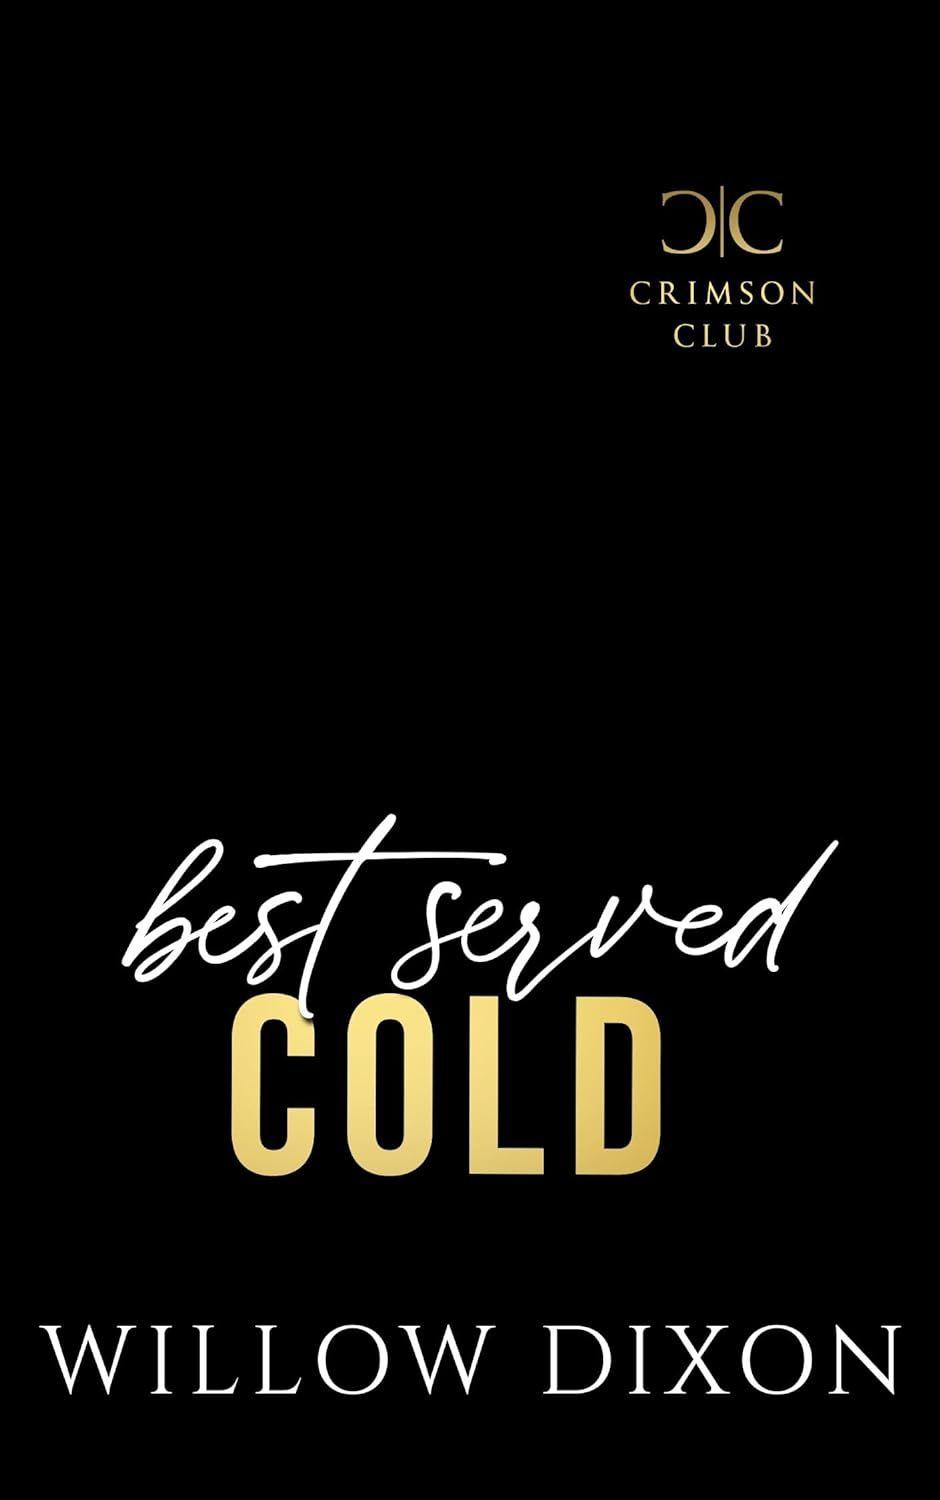 A black and gold cover with white text

Description automatically generated